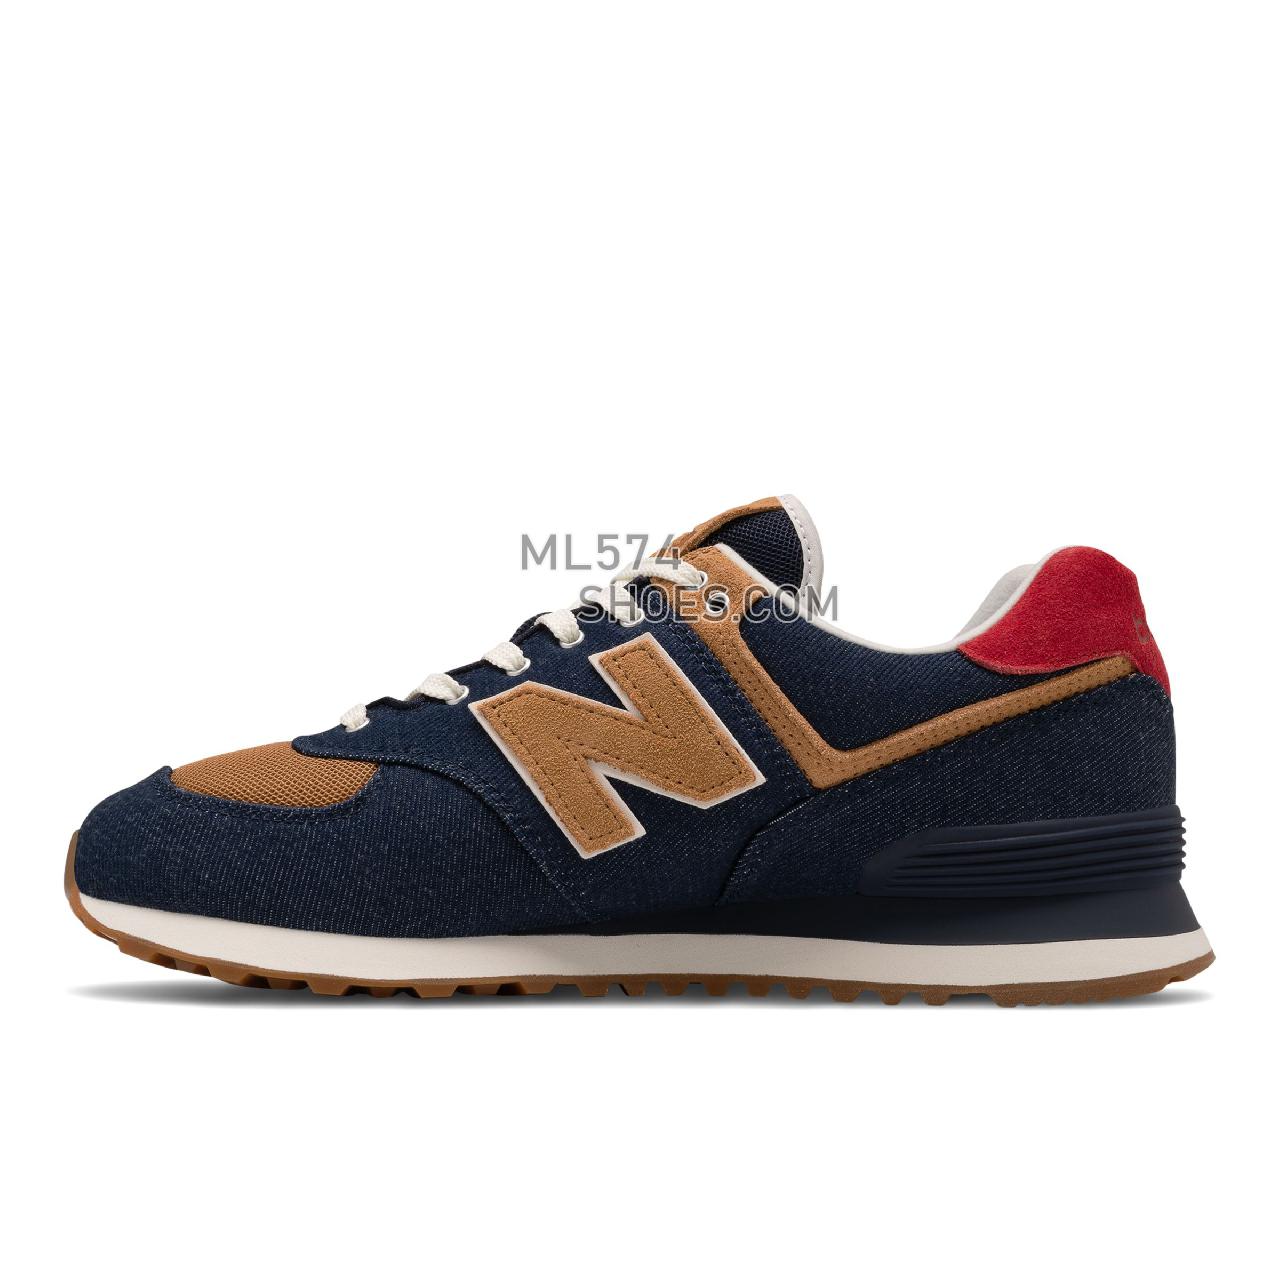 New Balance 574v2 Denim - Men's Classic Sneakers - Pigment with Team Red - ML574DN2